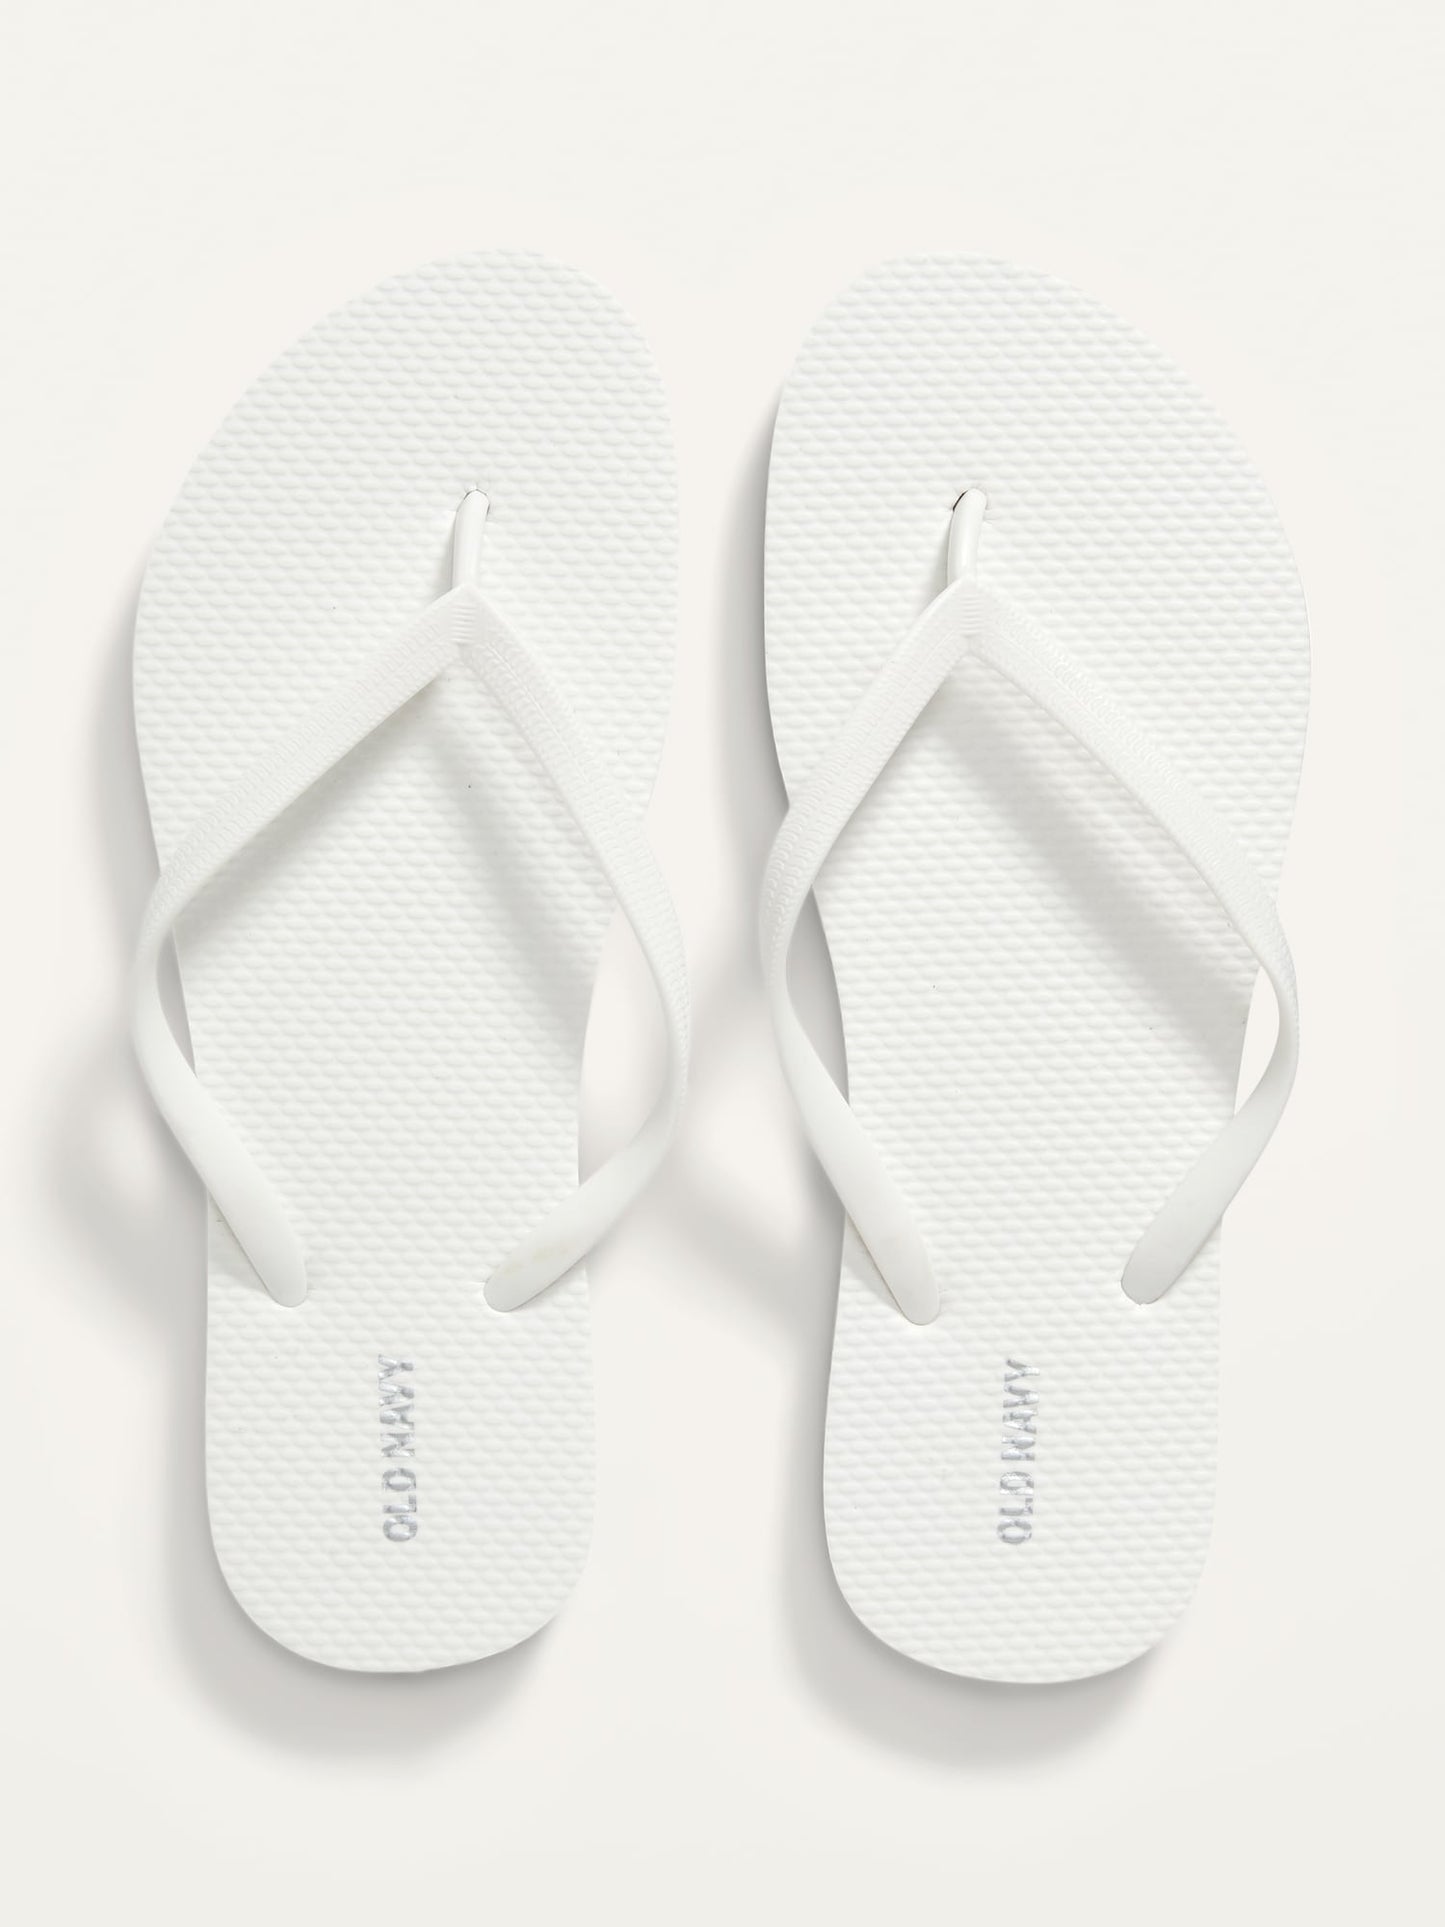 ON Plant-Based Flip-Flop Sandals For Women - Bright White